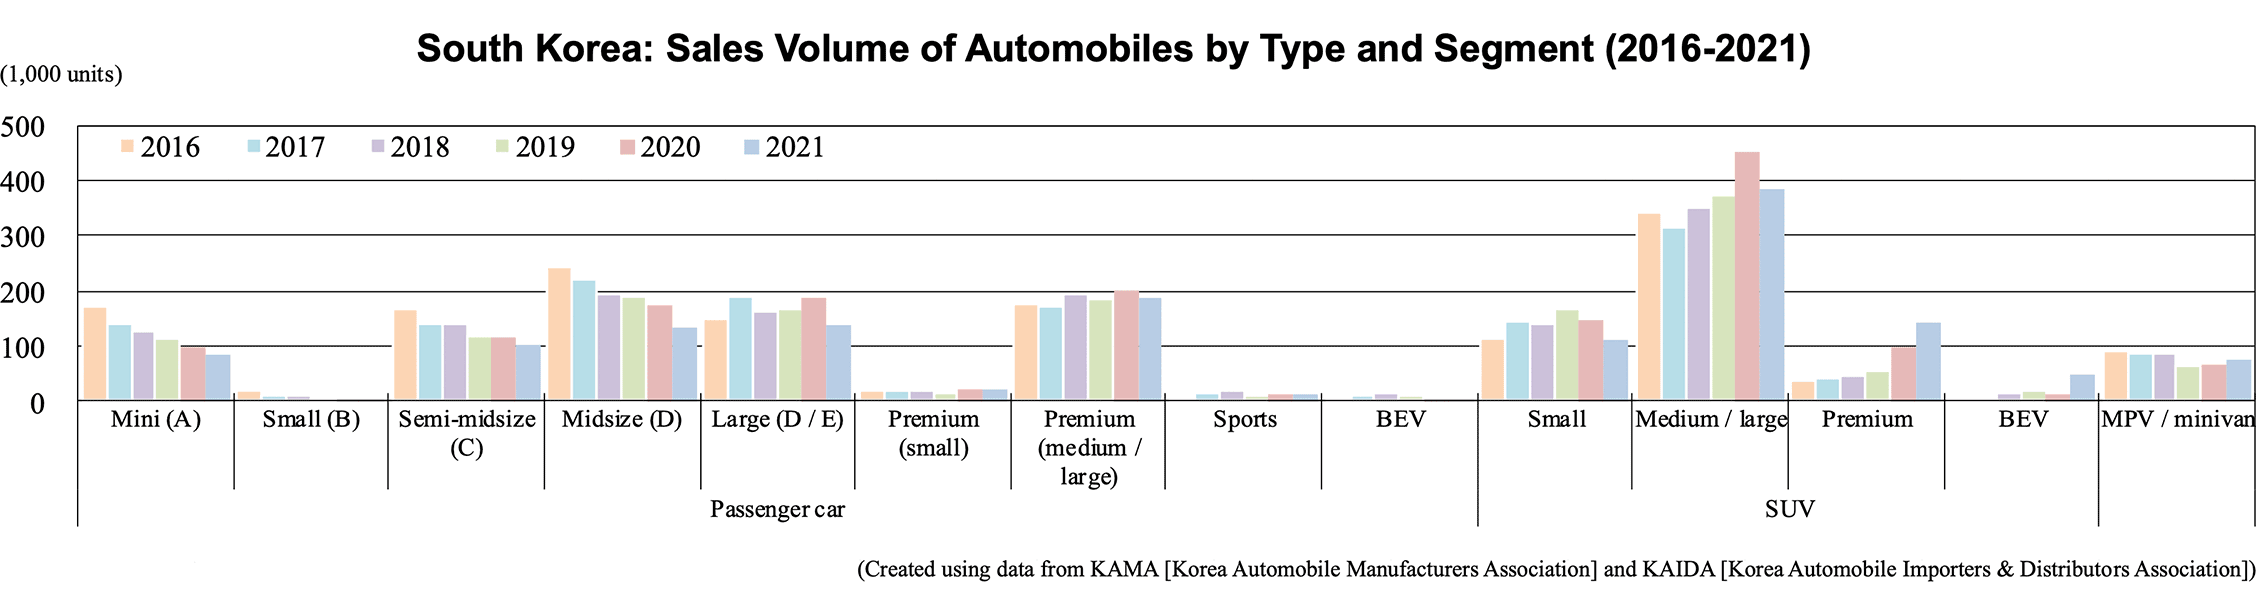 Bar graphs: South Korea: Sales Volume of Automobiles by Type and Segment (2016-2021)